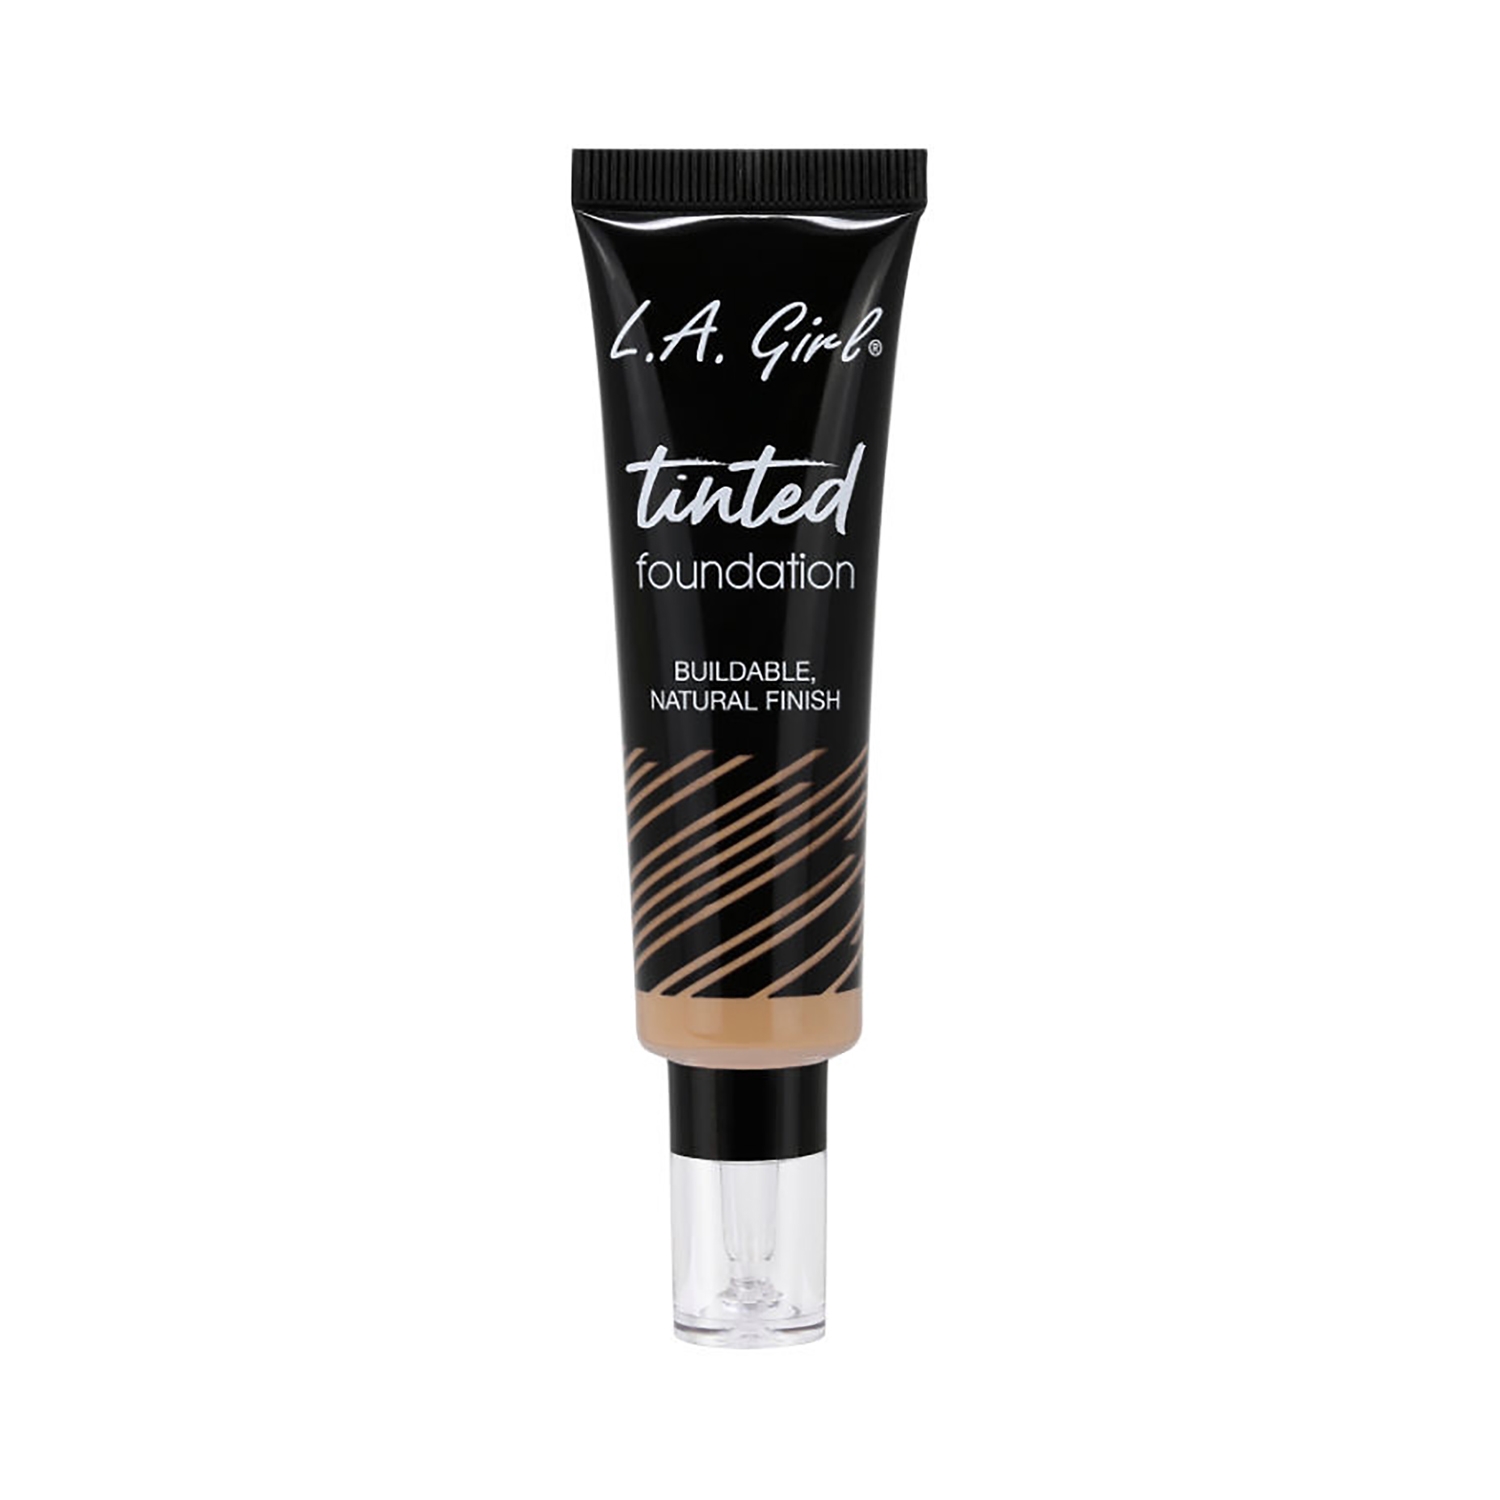 L.A. Girl | L.A. Girl Tinted Foundation - Golden (30ml)